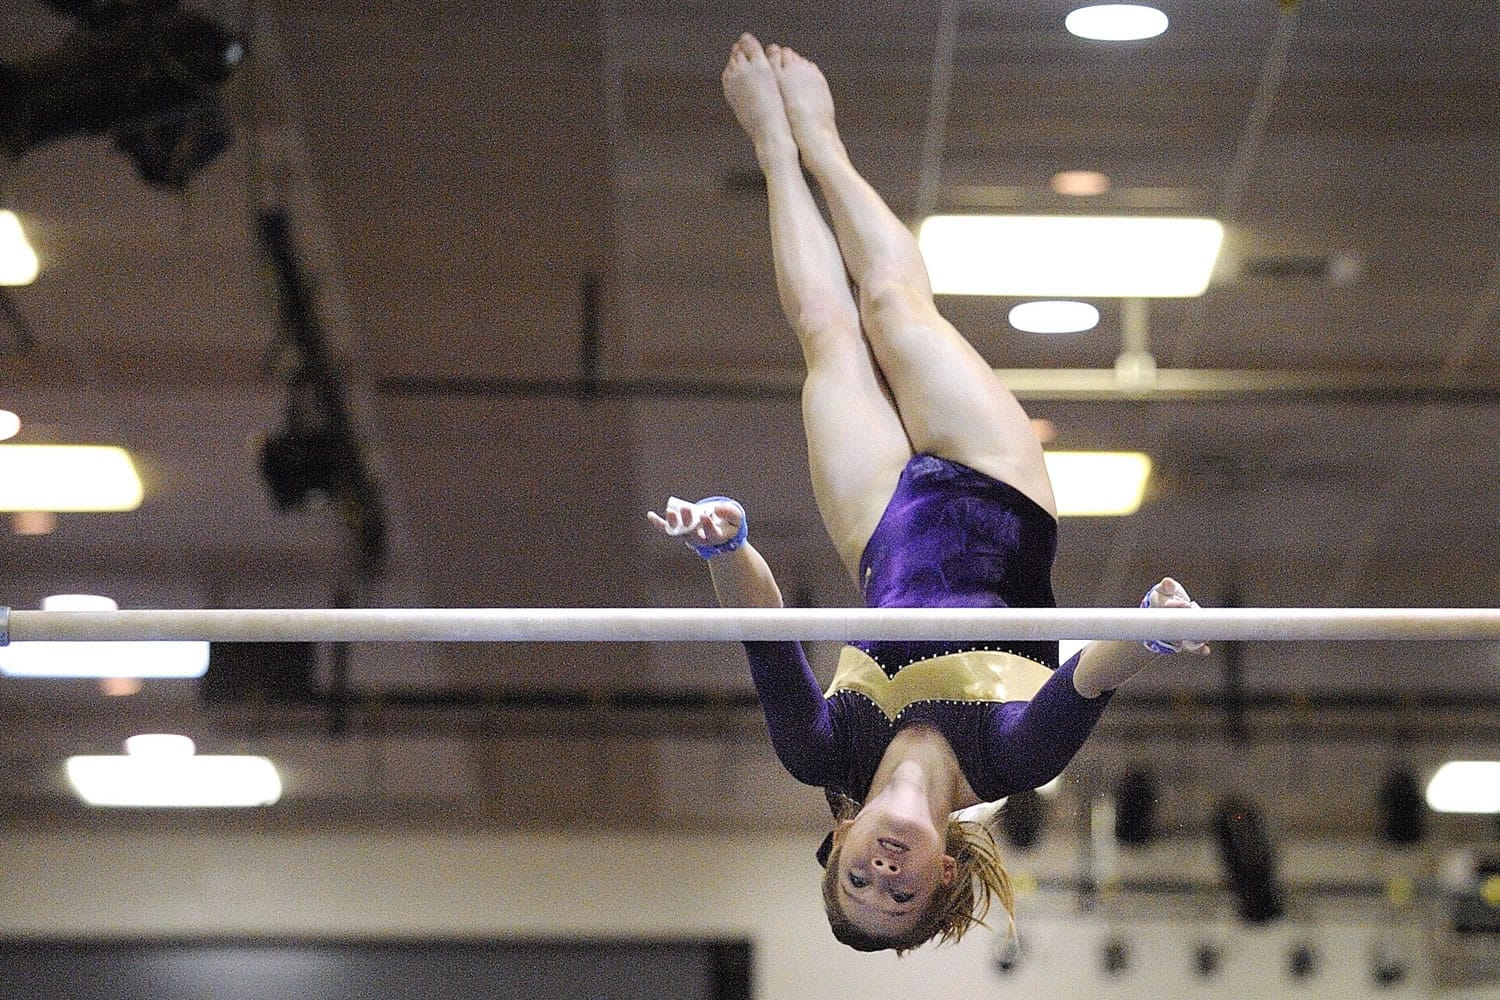 Jennifer DeBellis of Columbia River High School scores a 9.20 on the uneven bars at the WIAA state gymnastics competition on Friday.